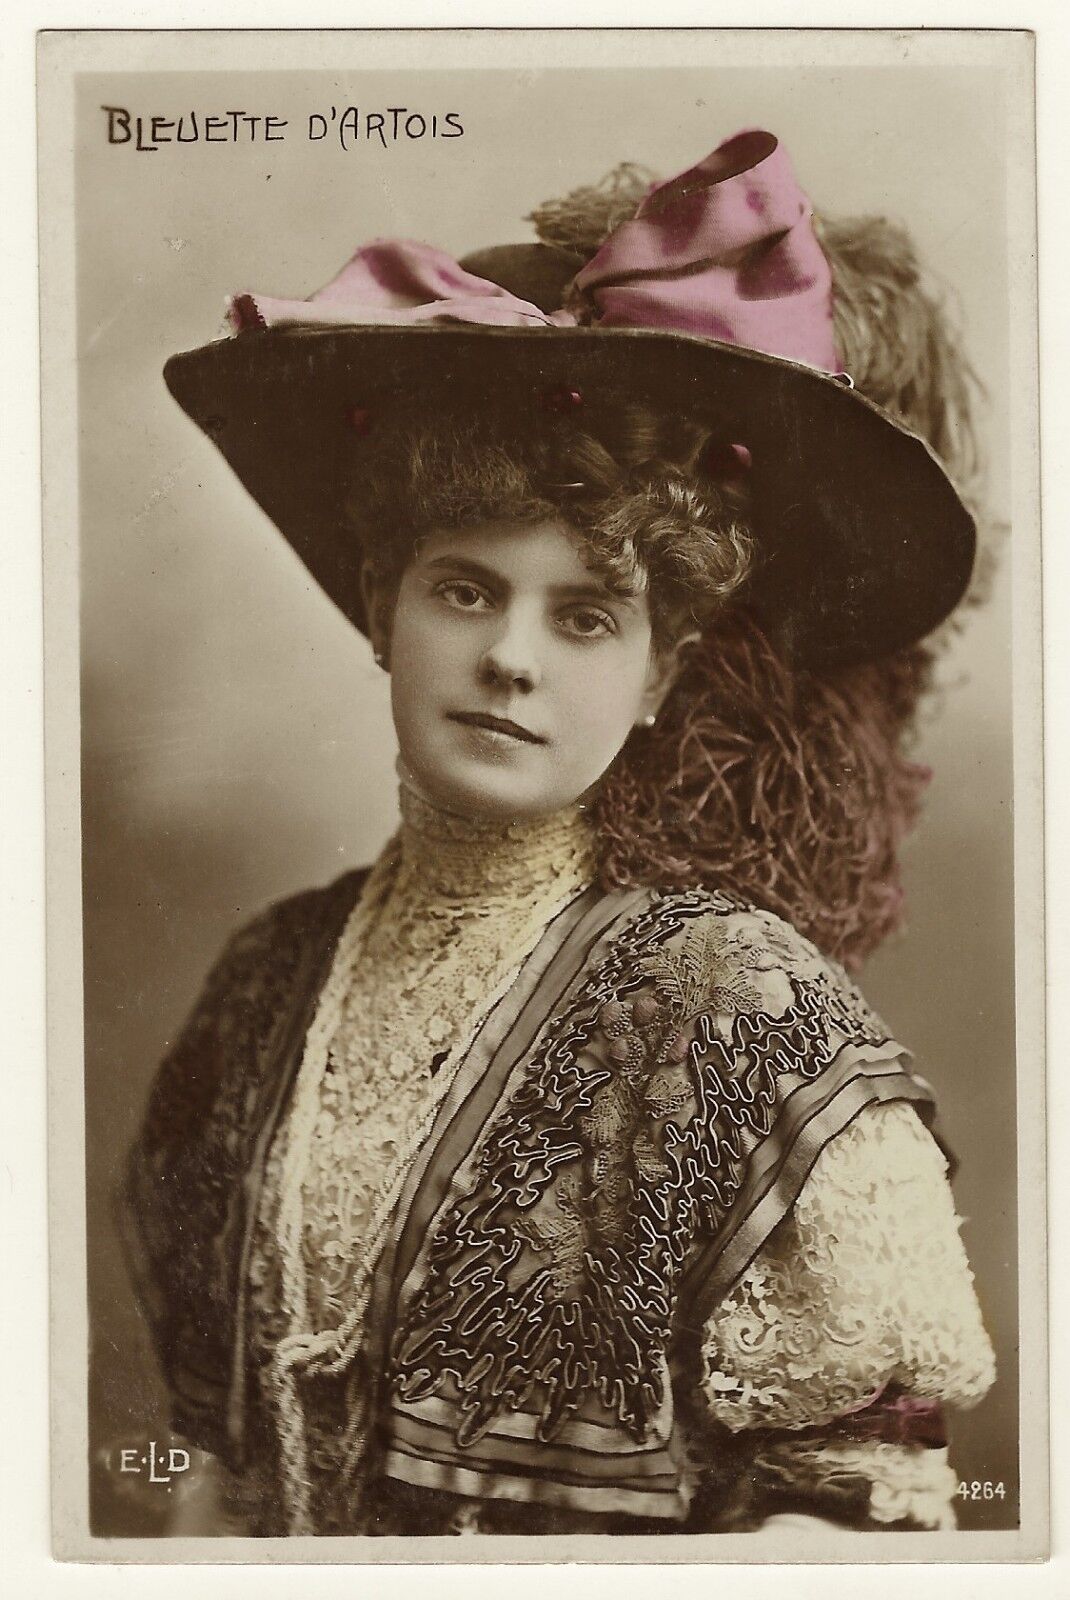 BEAUTIFUL FRENCH PERFORMER: BLEUETTE D’ARTOIS  (REAL PHOTO POSTCARD)